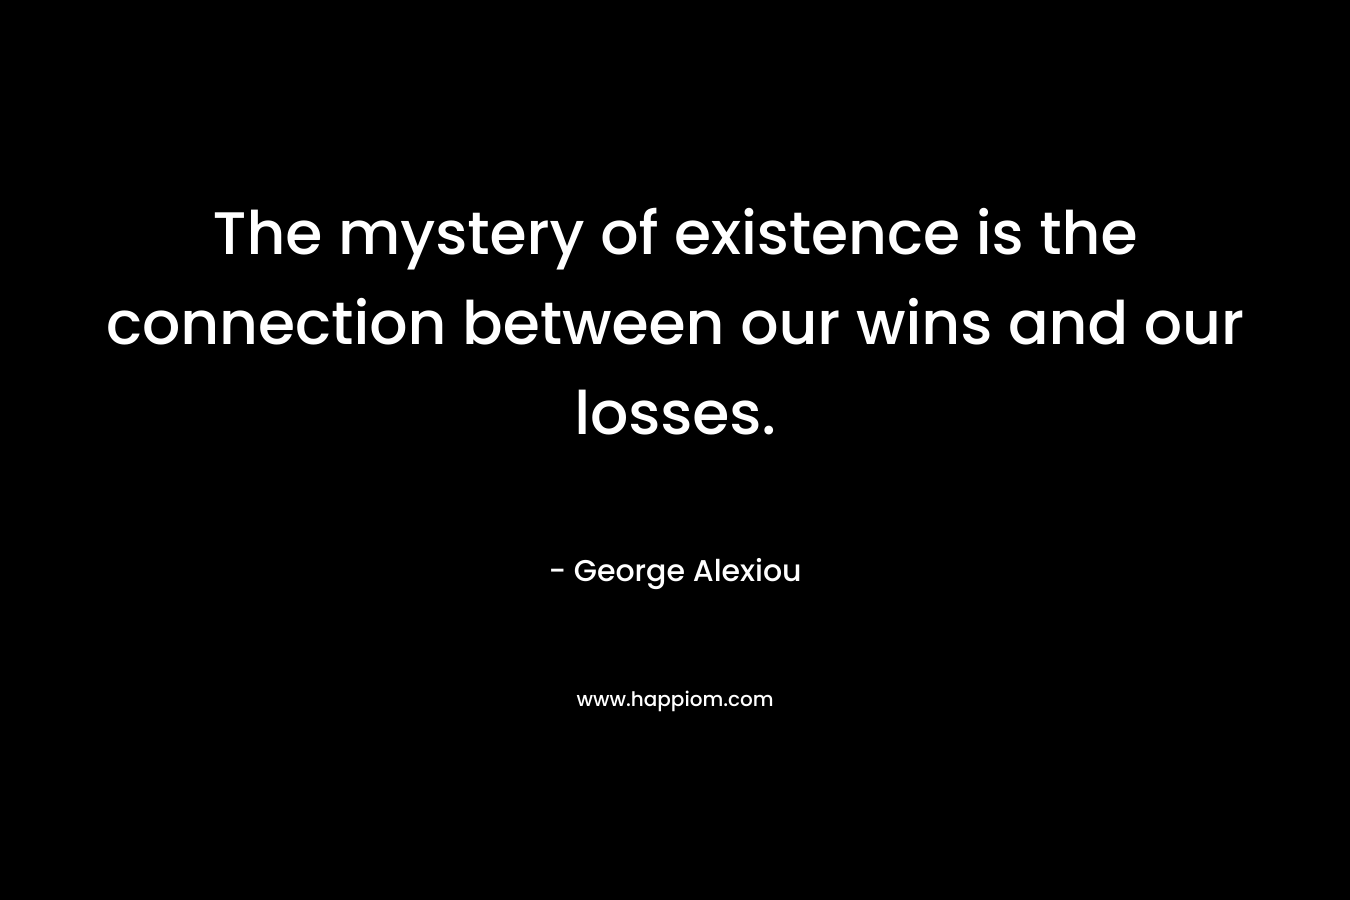 The mystery of existence is the connection between our wins and our losses. – George Alexiou